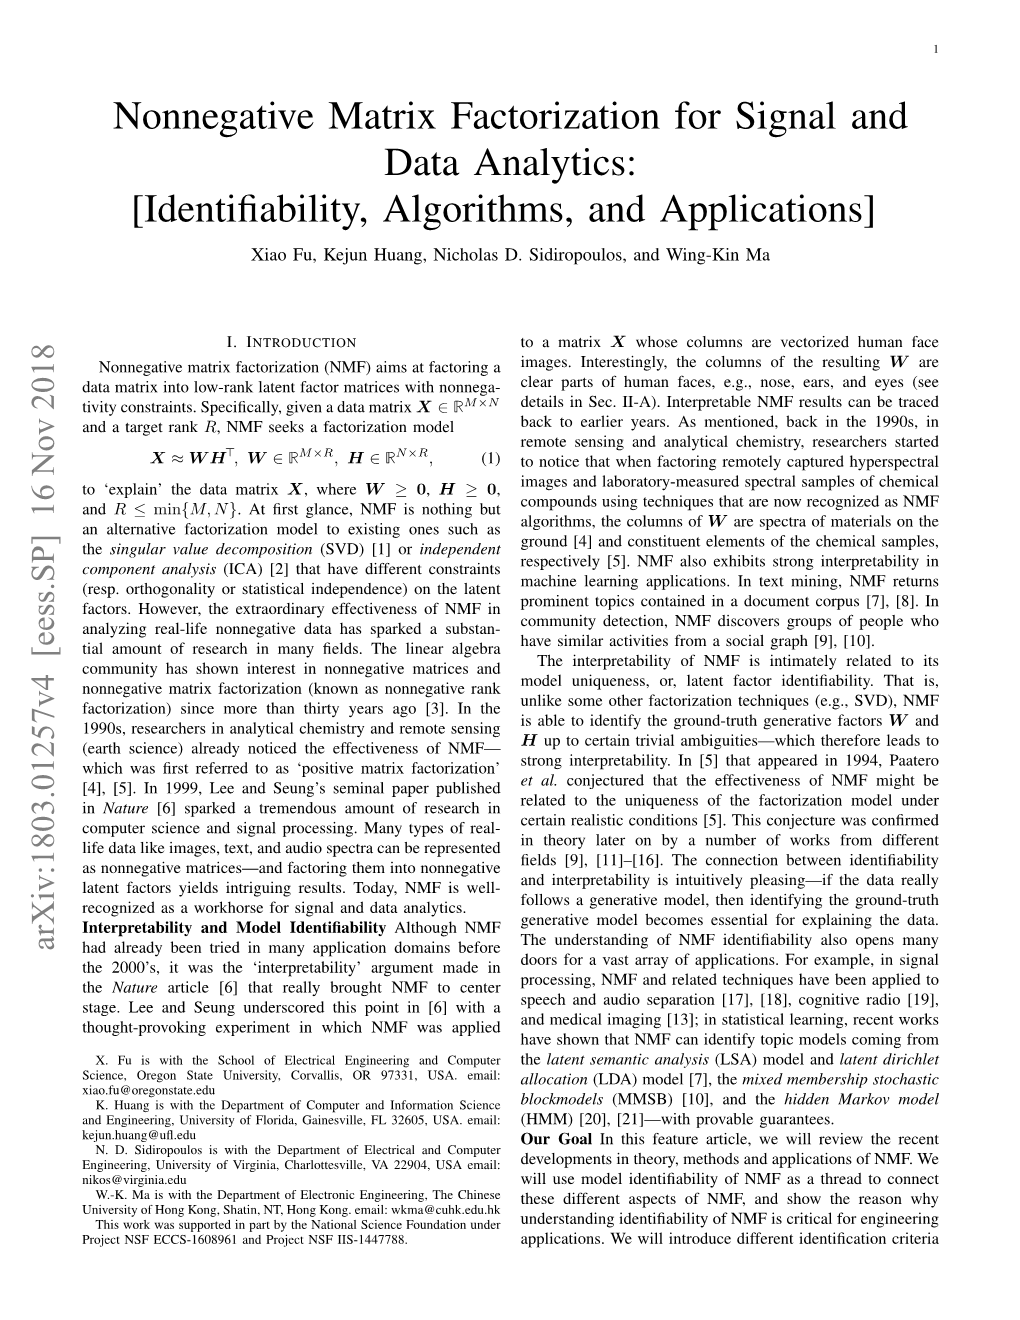 Nonnegative Matrix Factorization for Signal and Data Analytics: [Identiﬁability, Algorithms, and Applications] Xiao Fu, Kejun Huang, Nicholas D